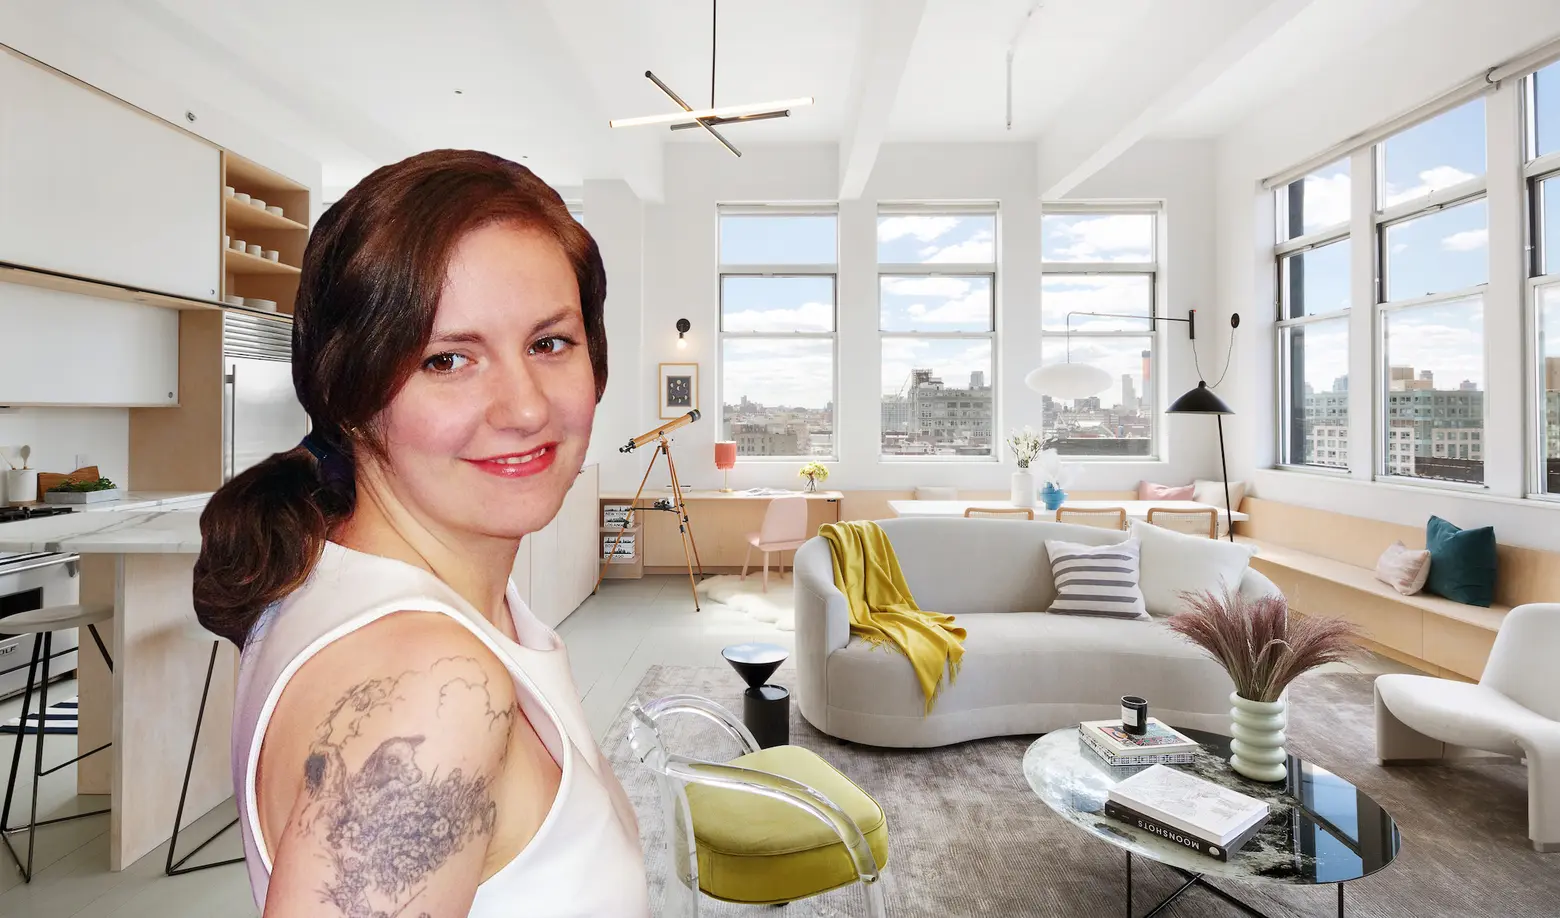 Lena Dunham, still eager to part ways with Brooklyn, relists her Williamsburg pad for $2.65M